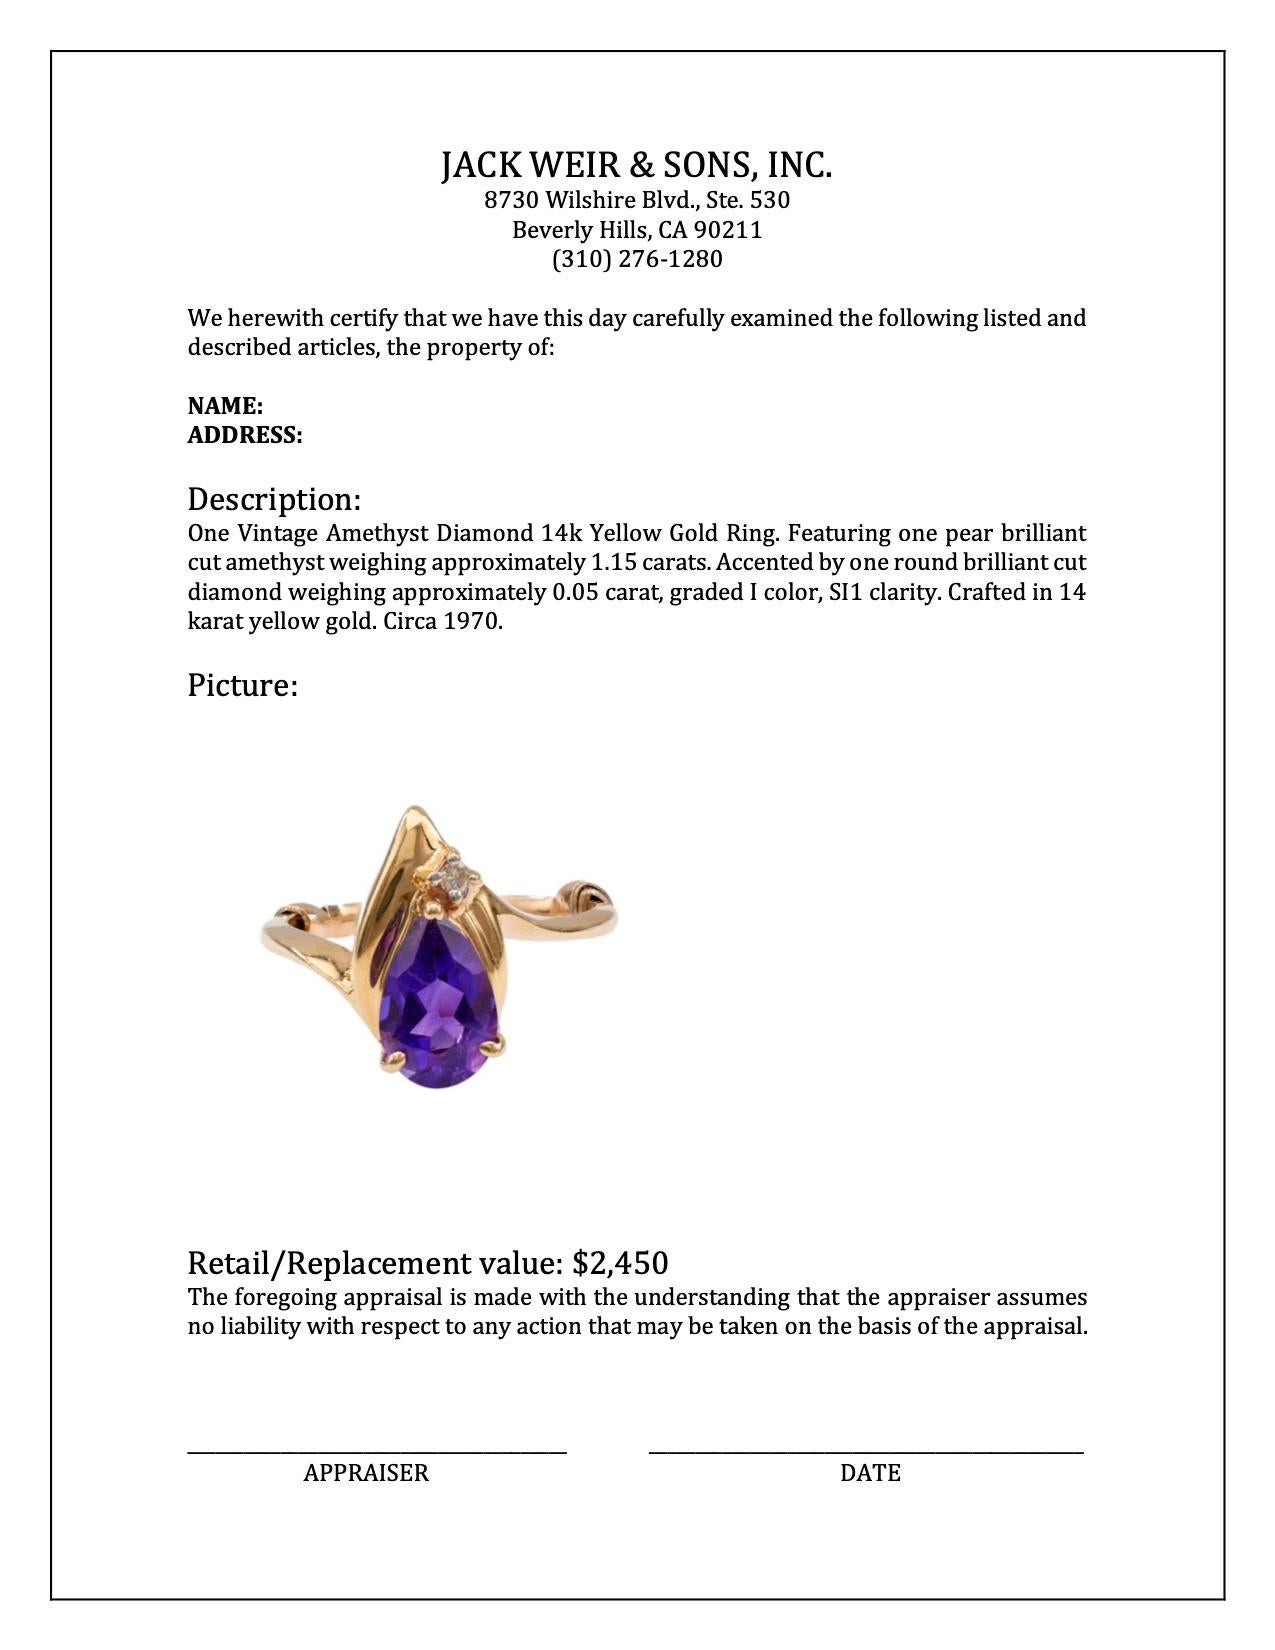 Vintage Amethyst Diamond 14k Yellow Gold Ring For Sale 2